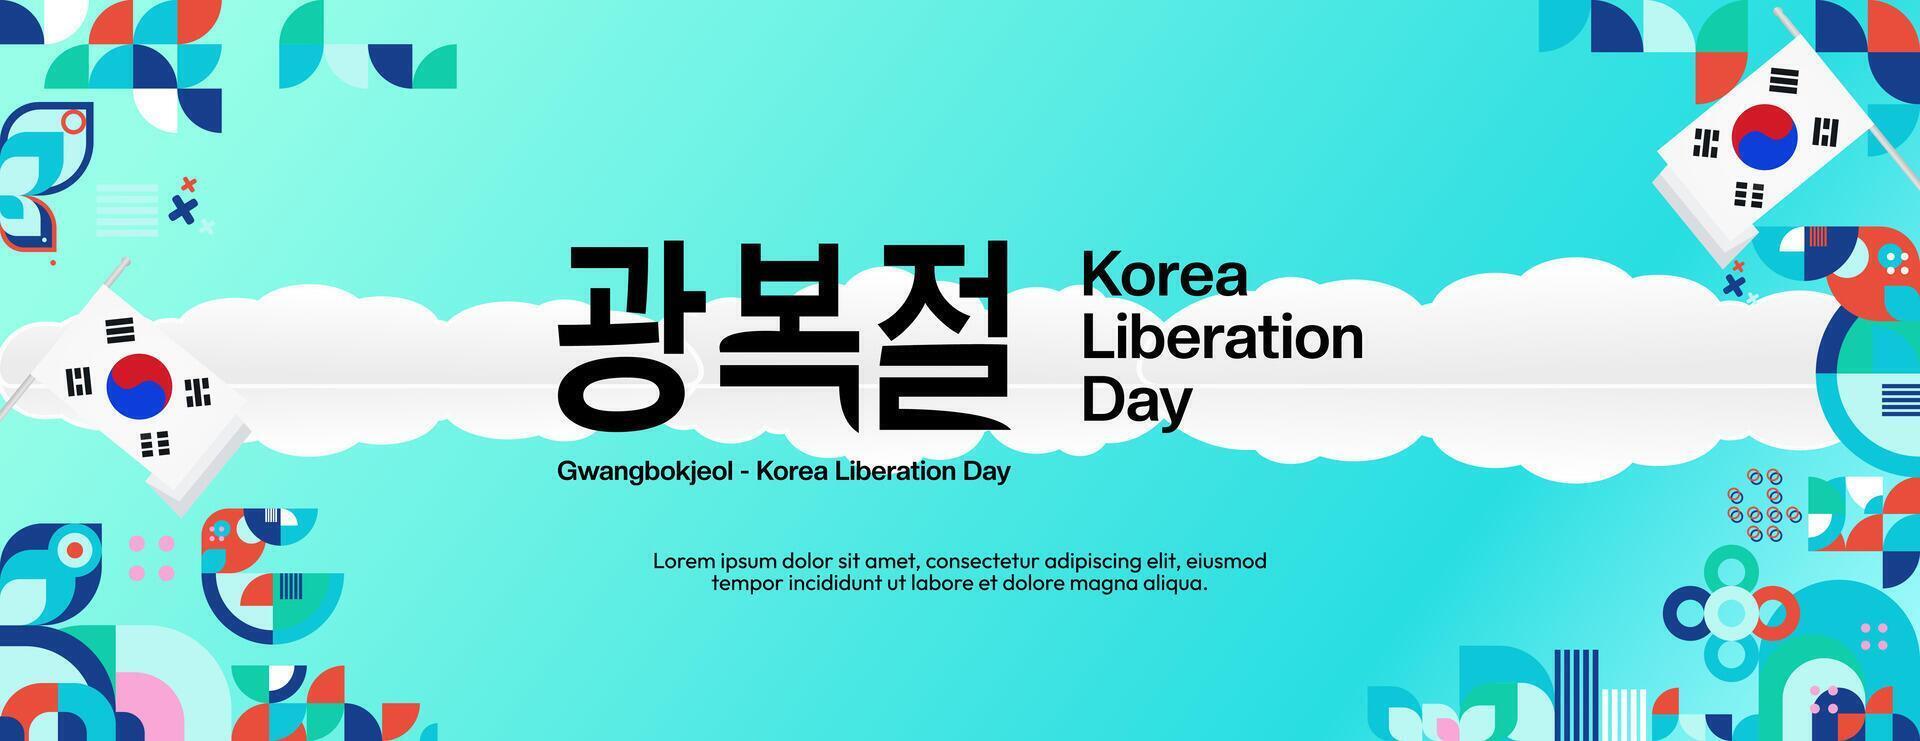 Korea National Liberation Day wide banner in colorful modern geometric style. Happy Gwangbokjeol day is South Korean independence day. Vector illustration for national holiday celebrate